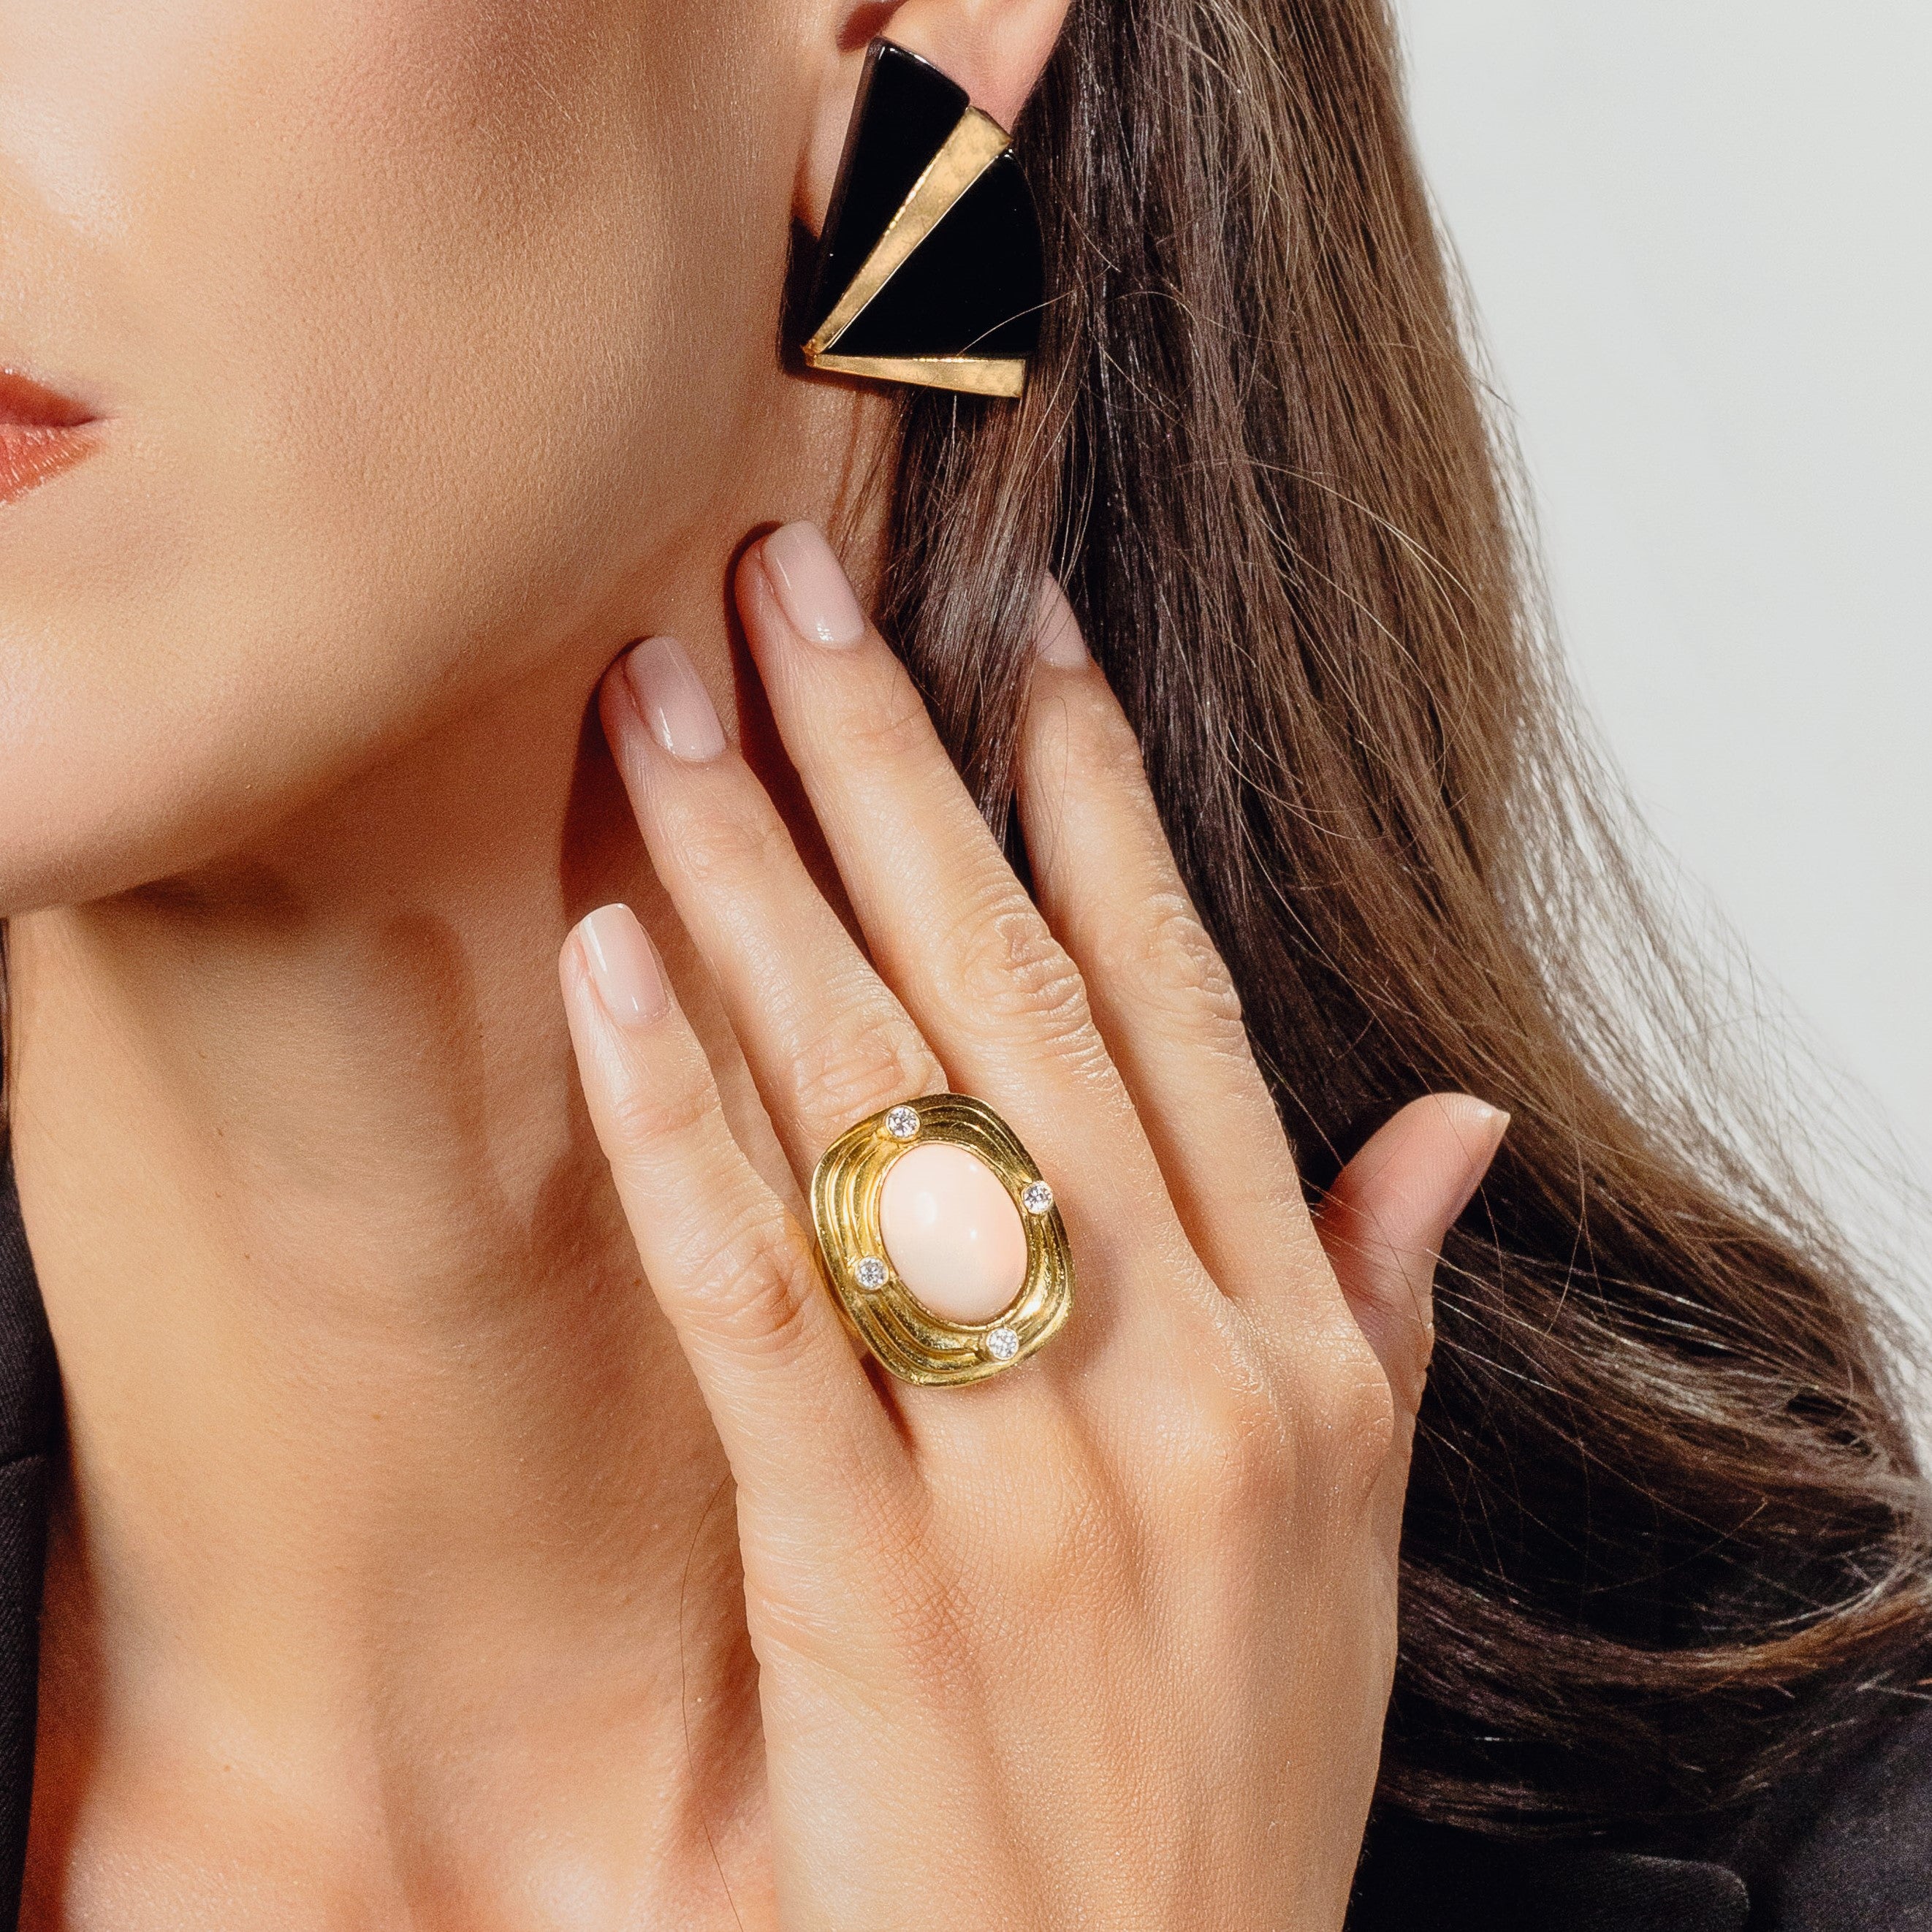 Woman’s face and hand wearing vintage ring and earrings.